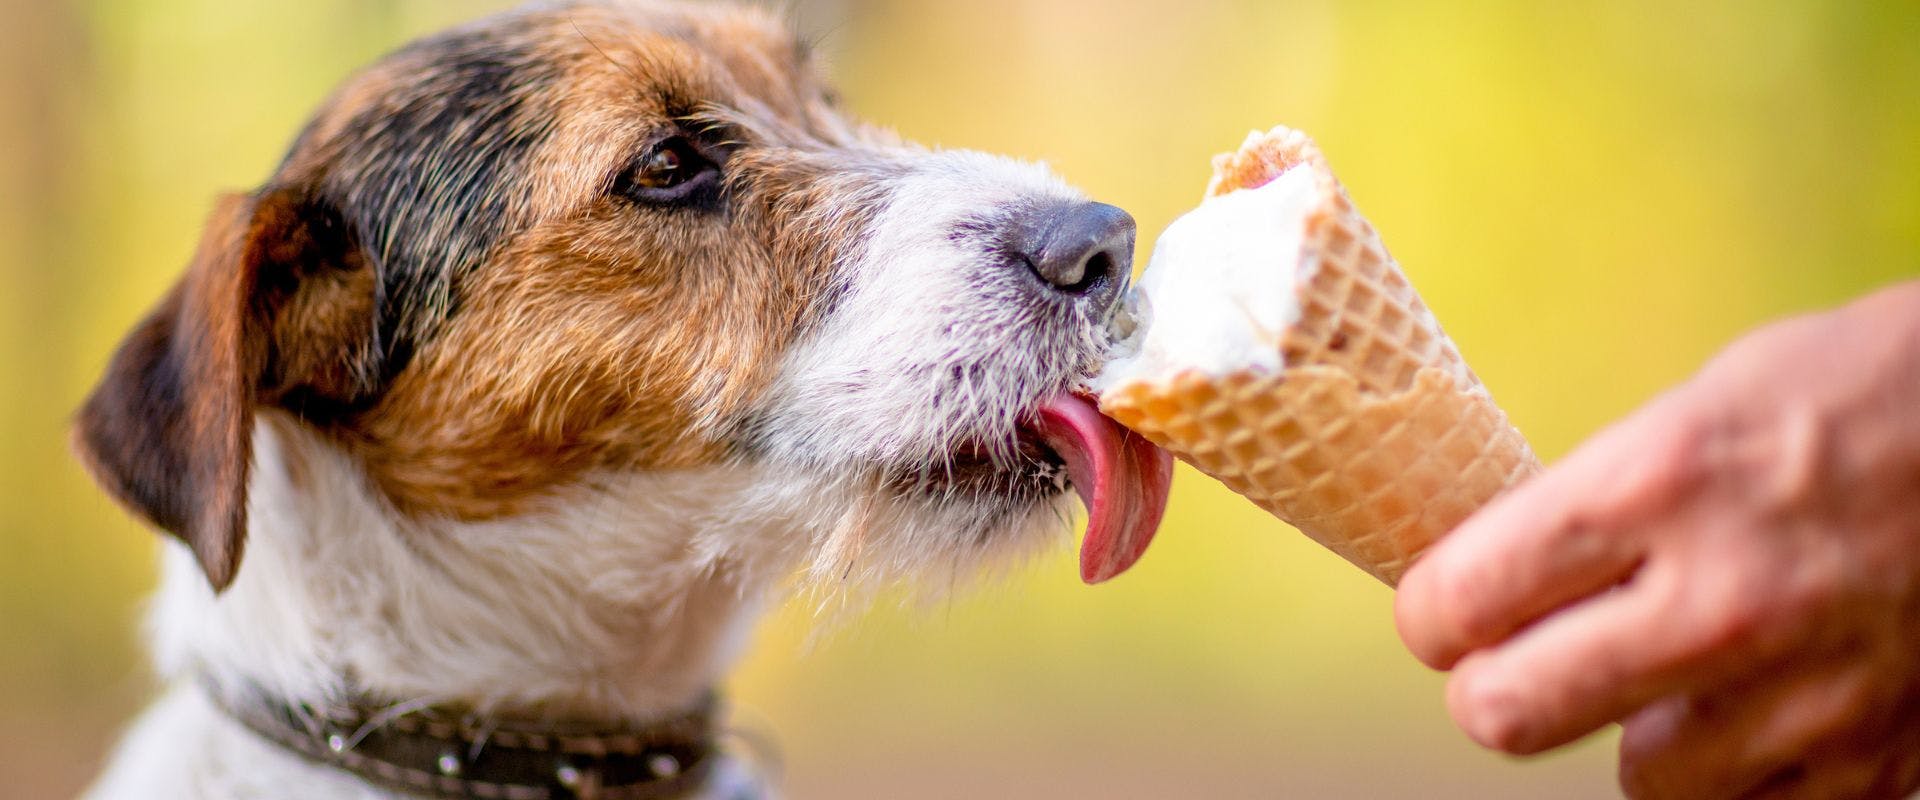 Jack Russell dog eating ice cream